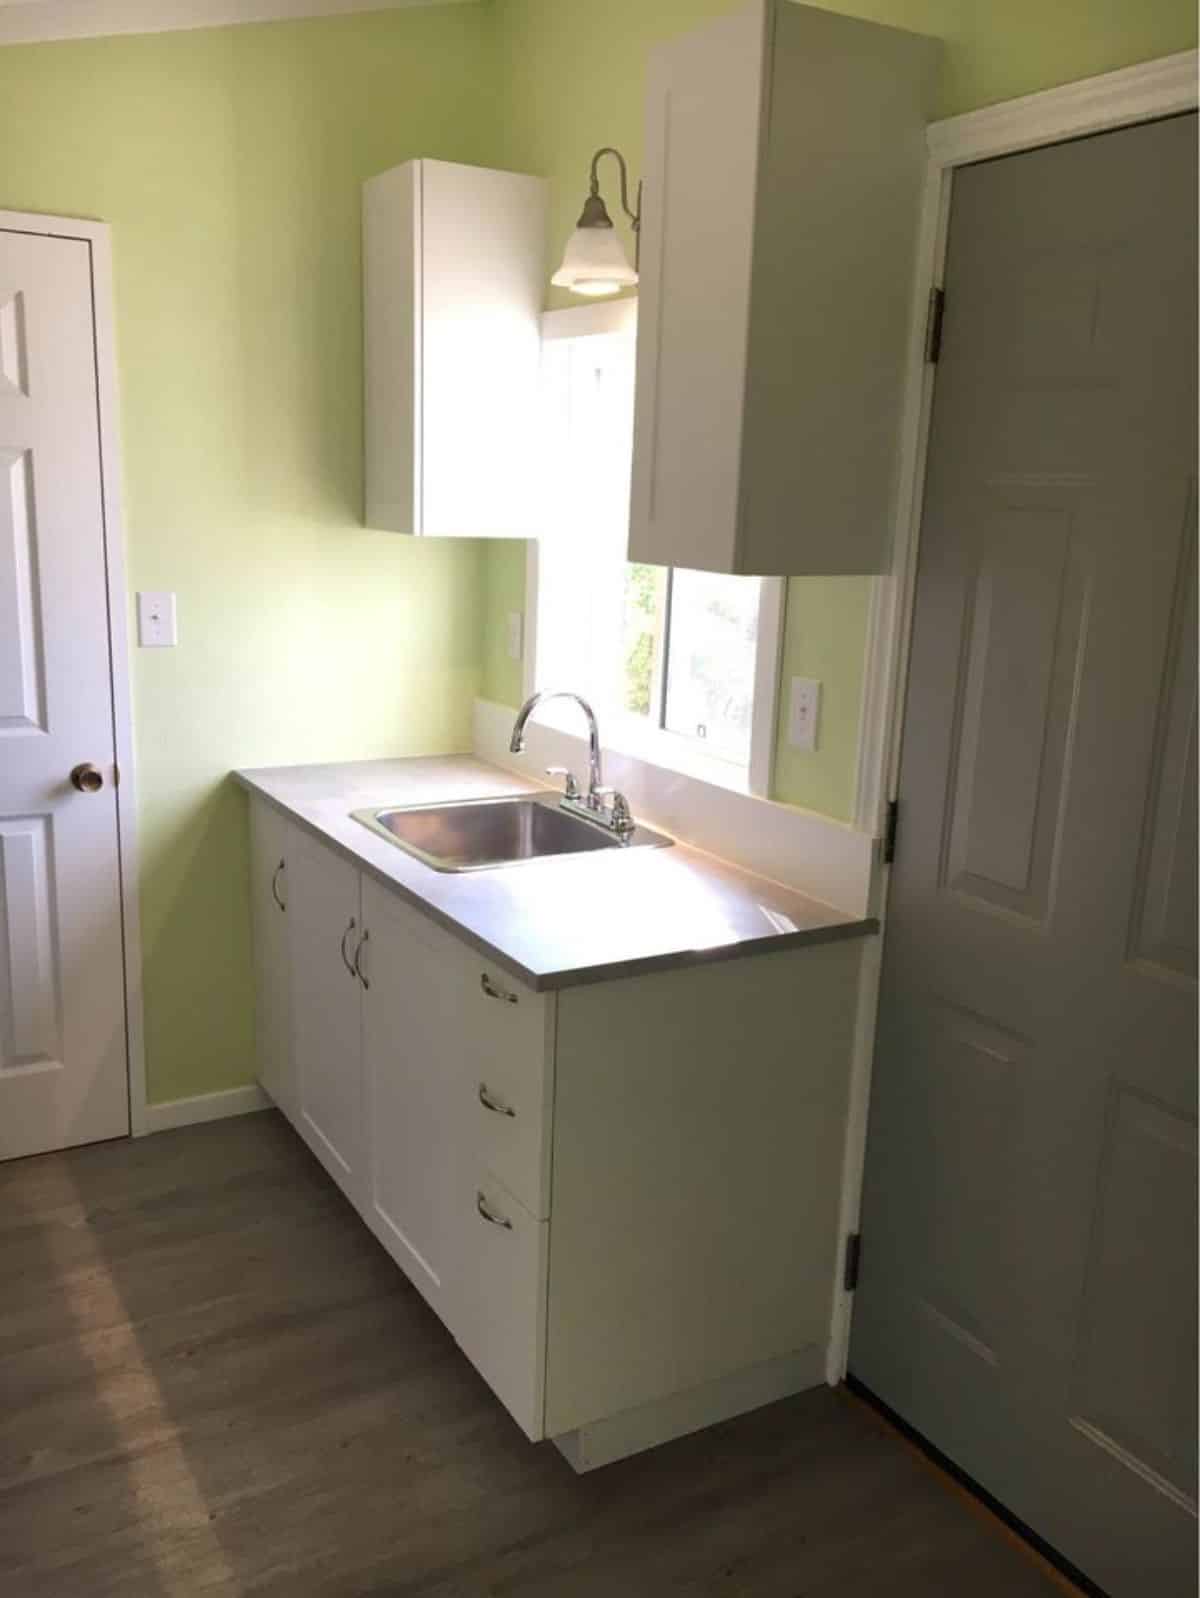 Stainless steel sink with storage cabinets